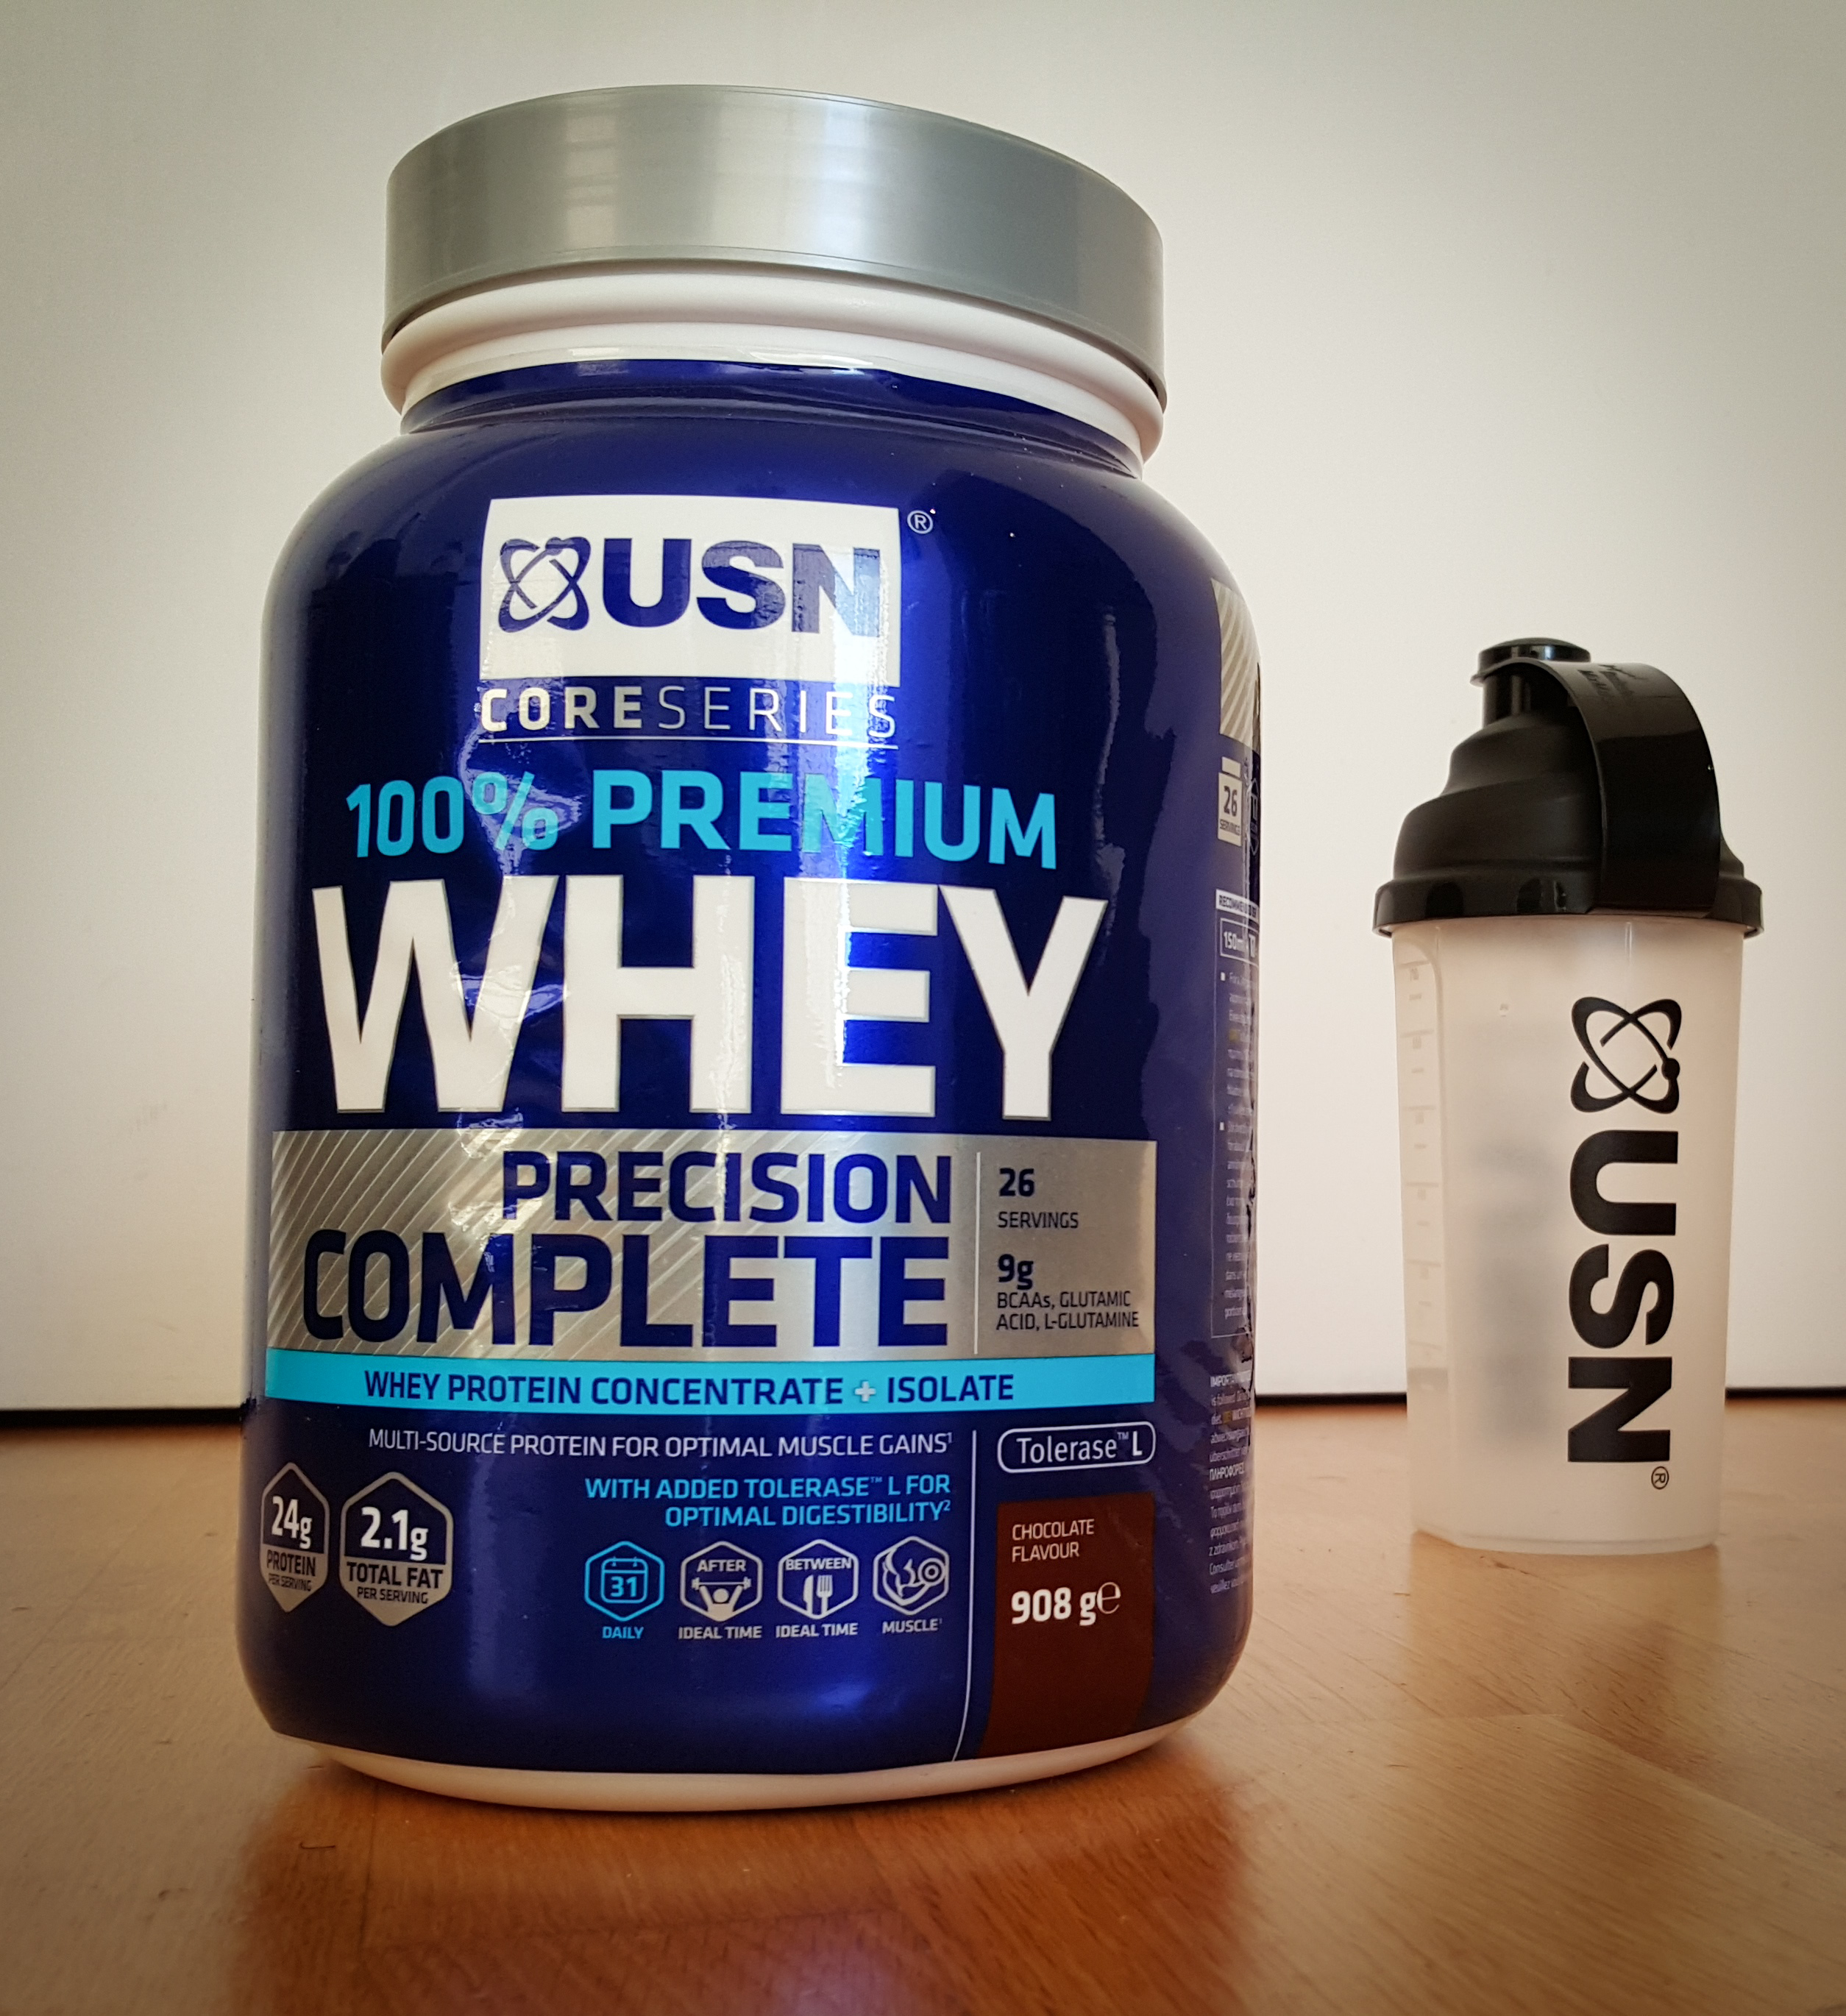 Протеин 22. Muscle King Flex Whey Protein. USN протеин. USN протеин концентрат. USN Whey+ Protein 2000 гр.